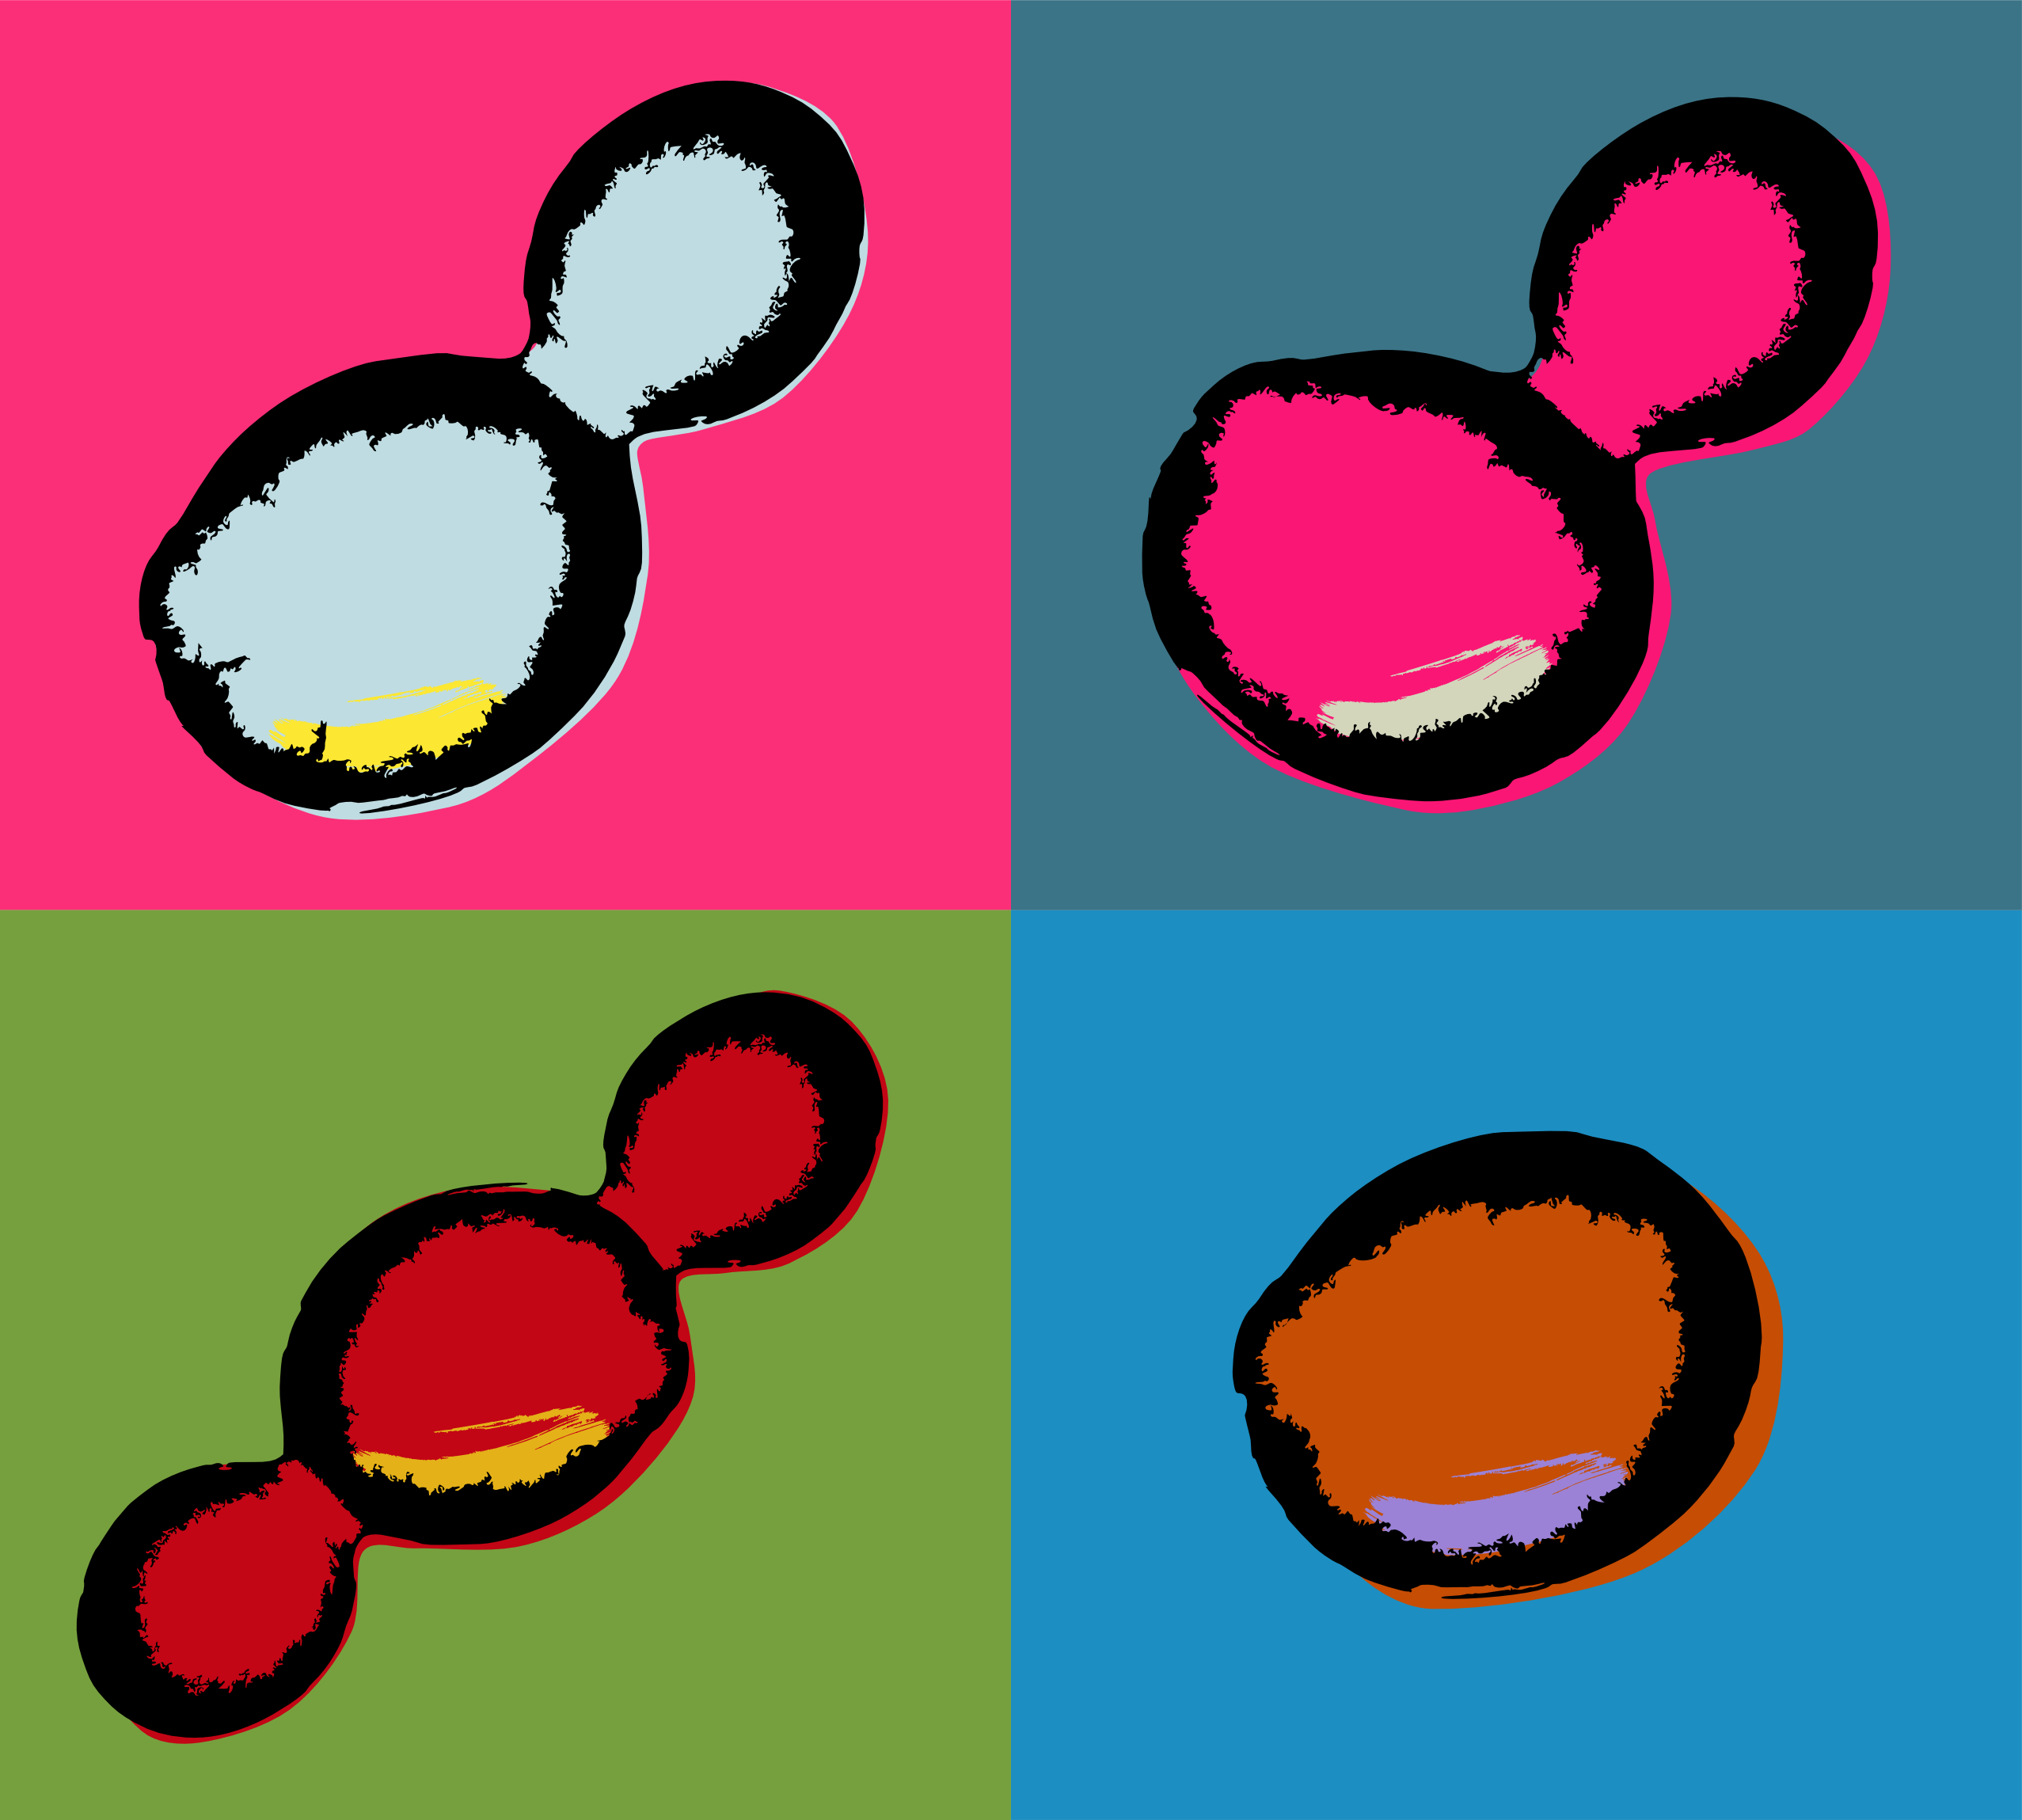 Brightly colored art depicting four squares, each containing a simplified image of budding yeast